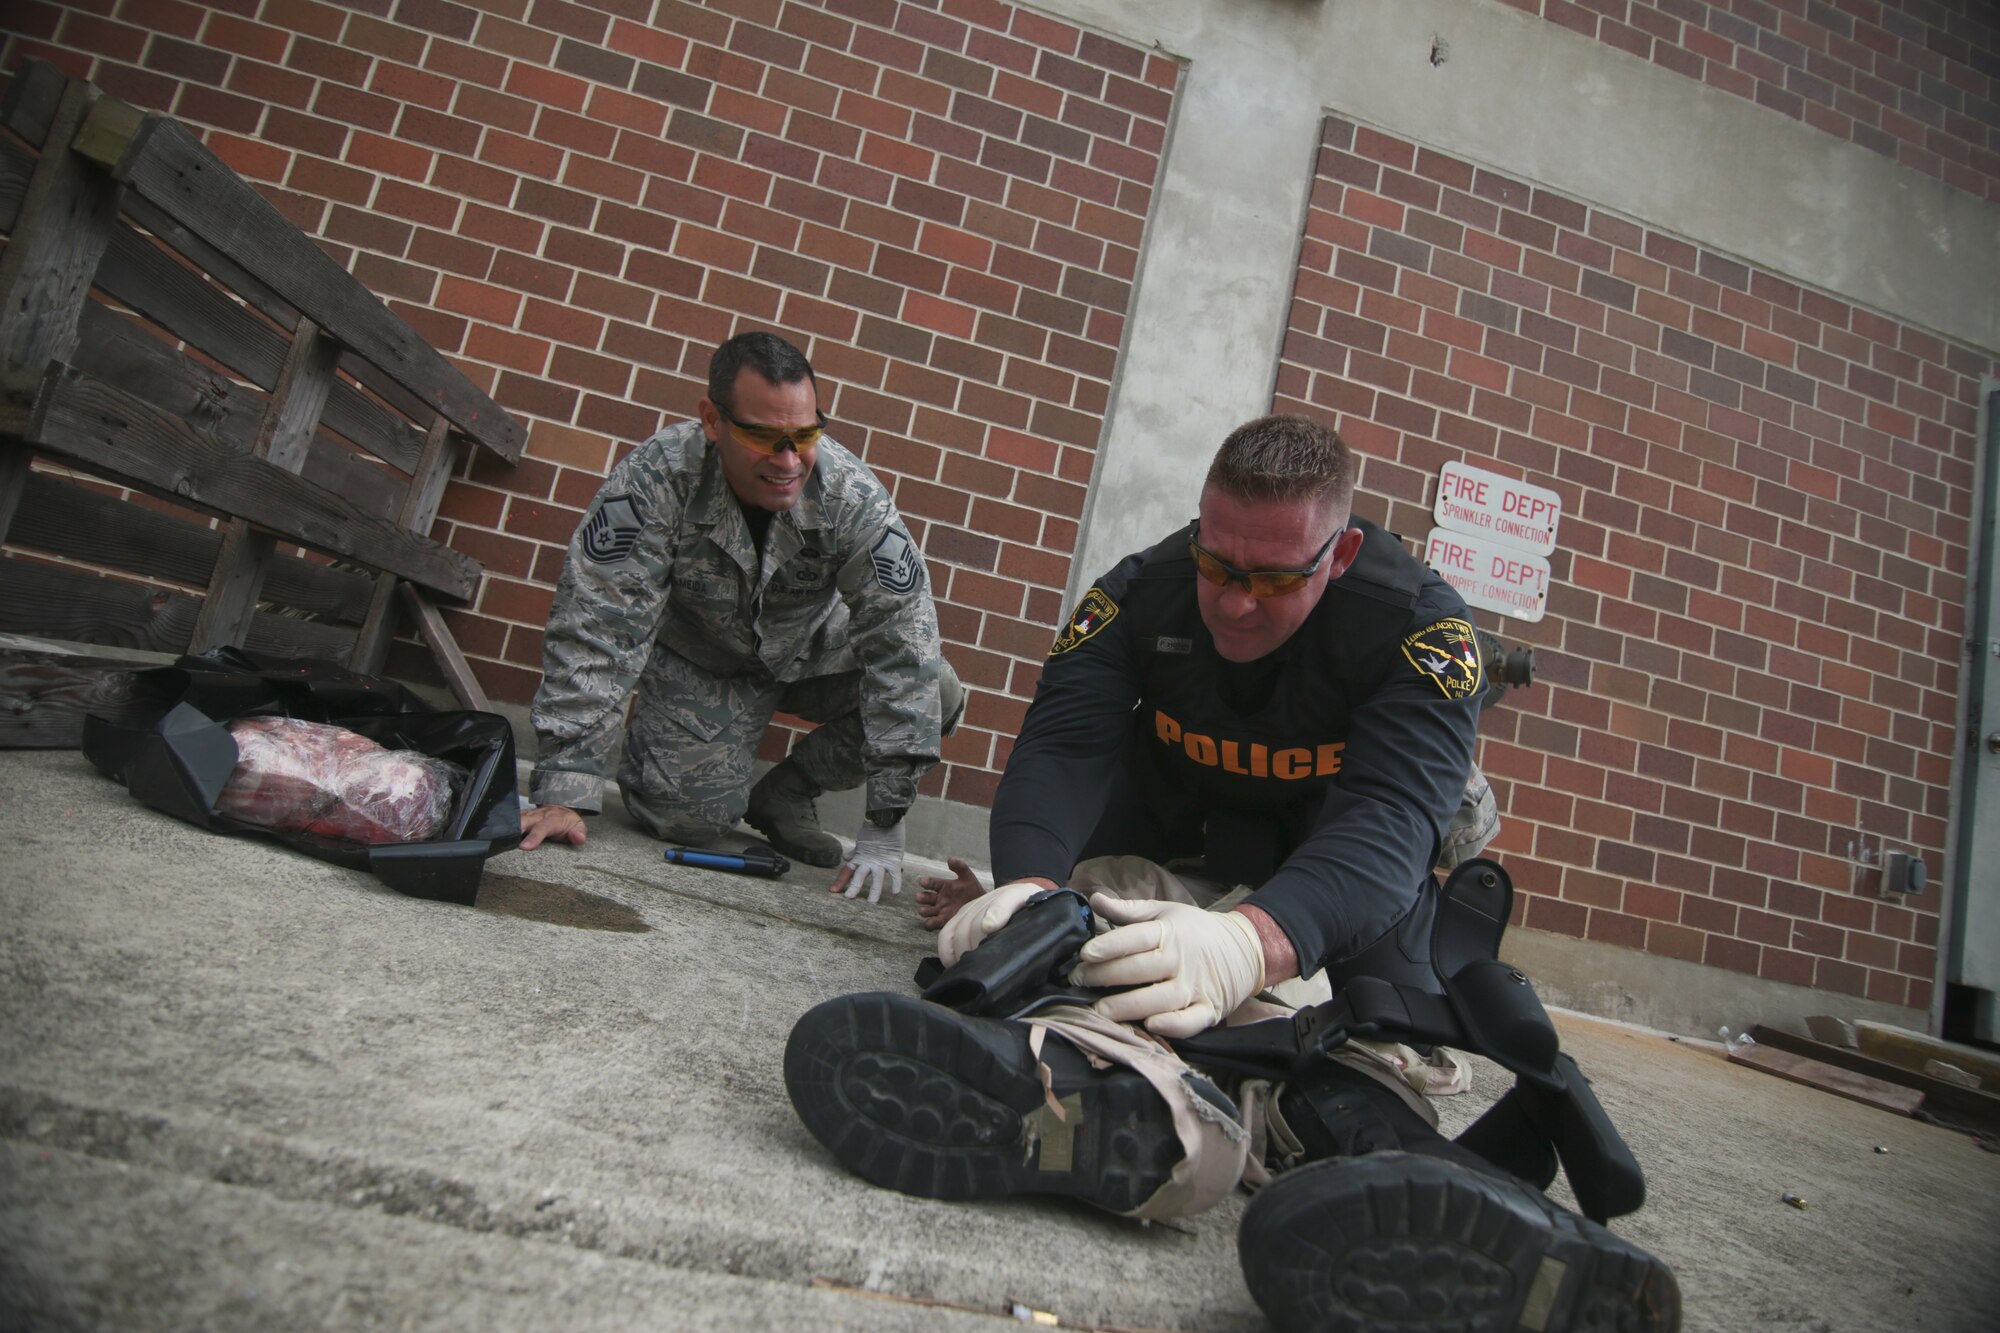 A picture of Long Beach Township Patrolman Matthew Compitello working on a simulated patient while being shadowed by U.S. Air Force Master Sgt. Jose Almeida.